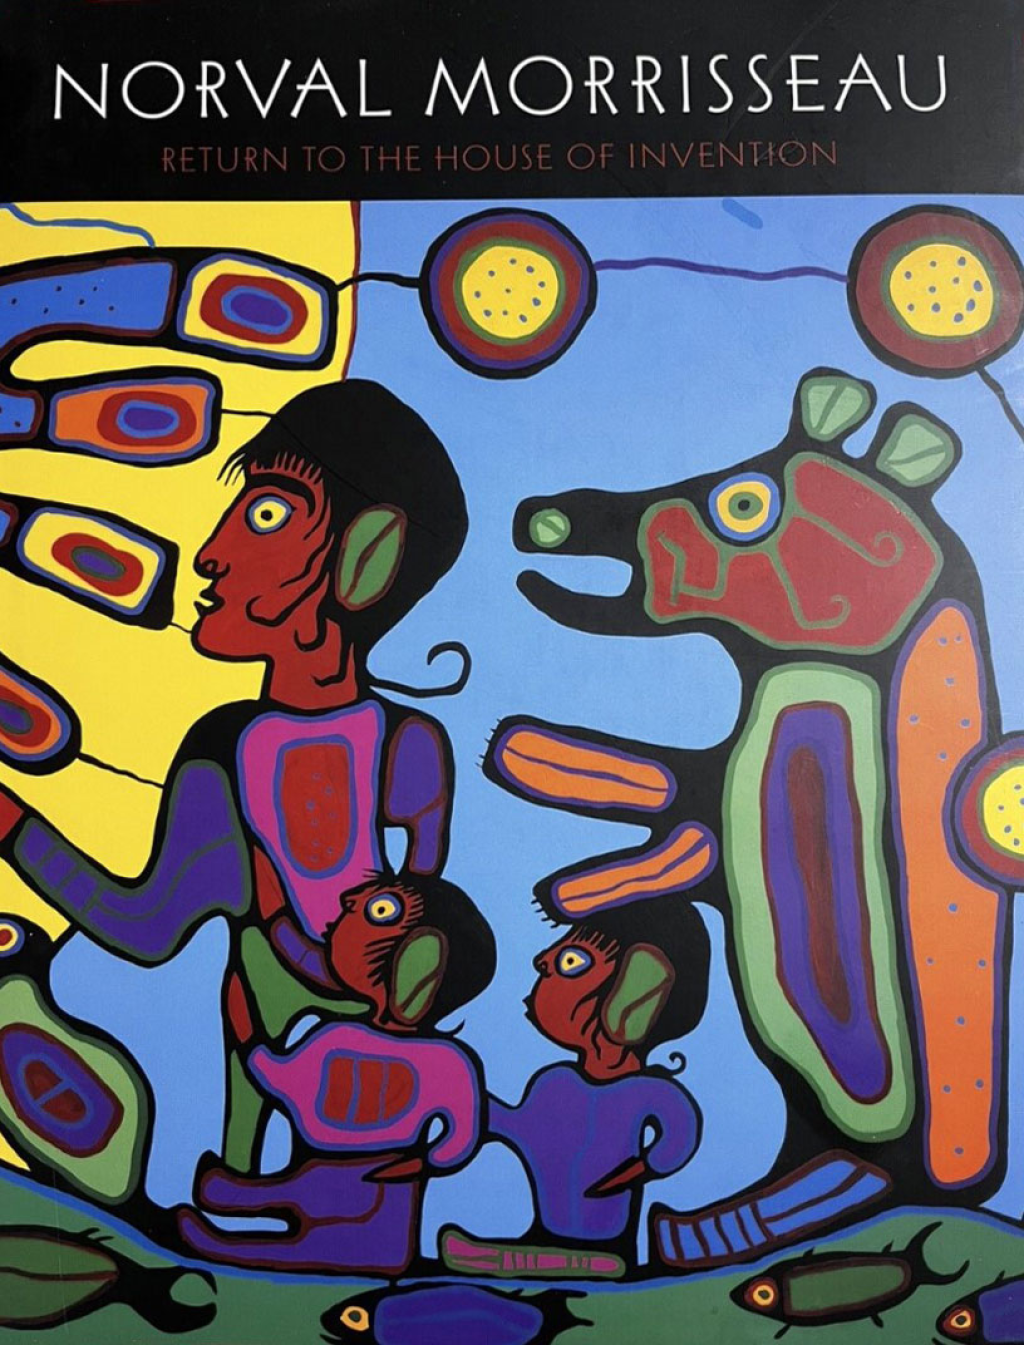 A picture of an exhibition of Morrisseau's work in Toronto